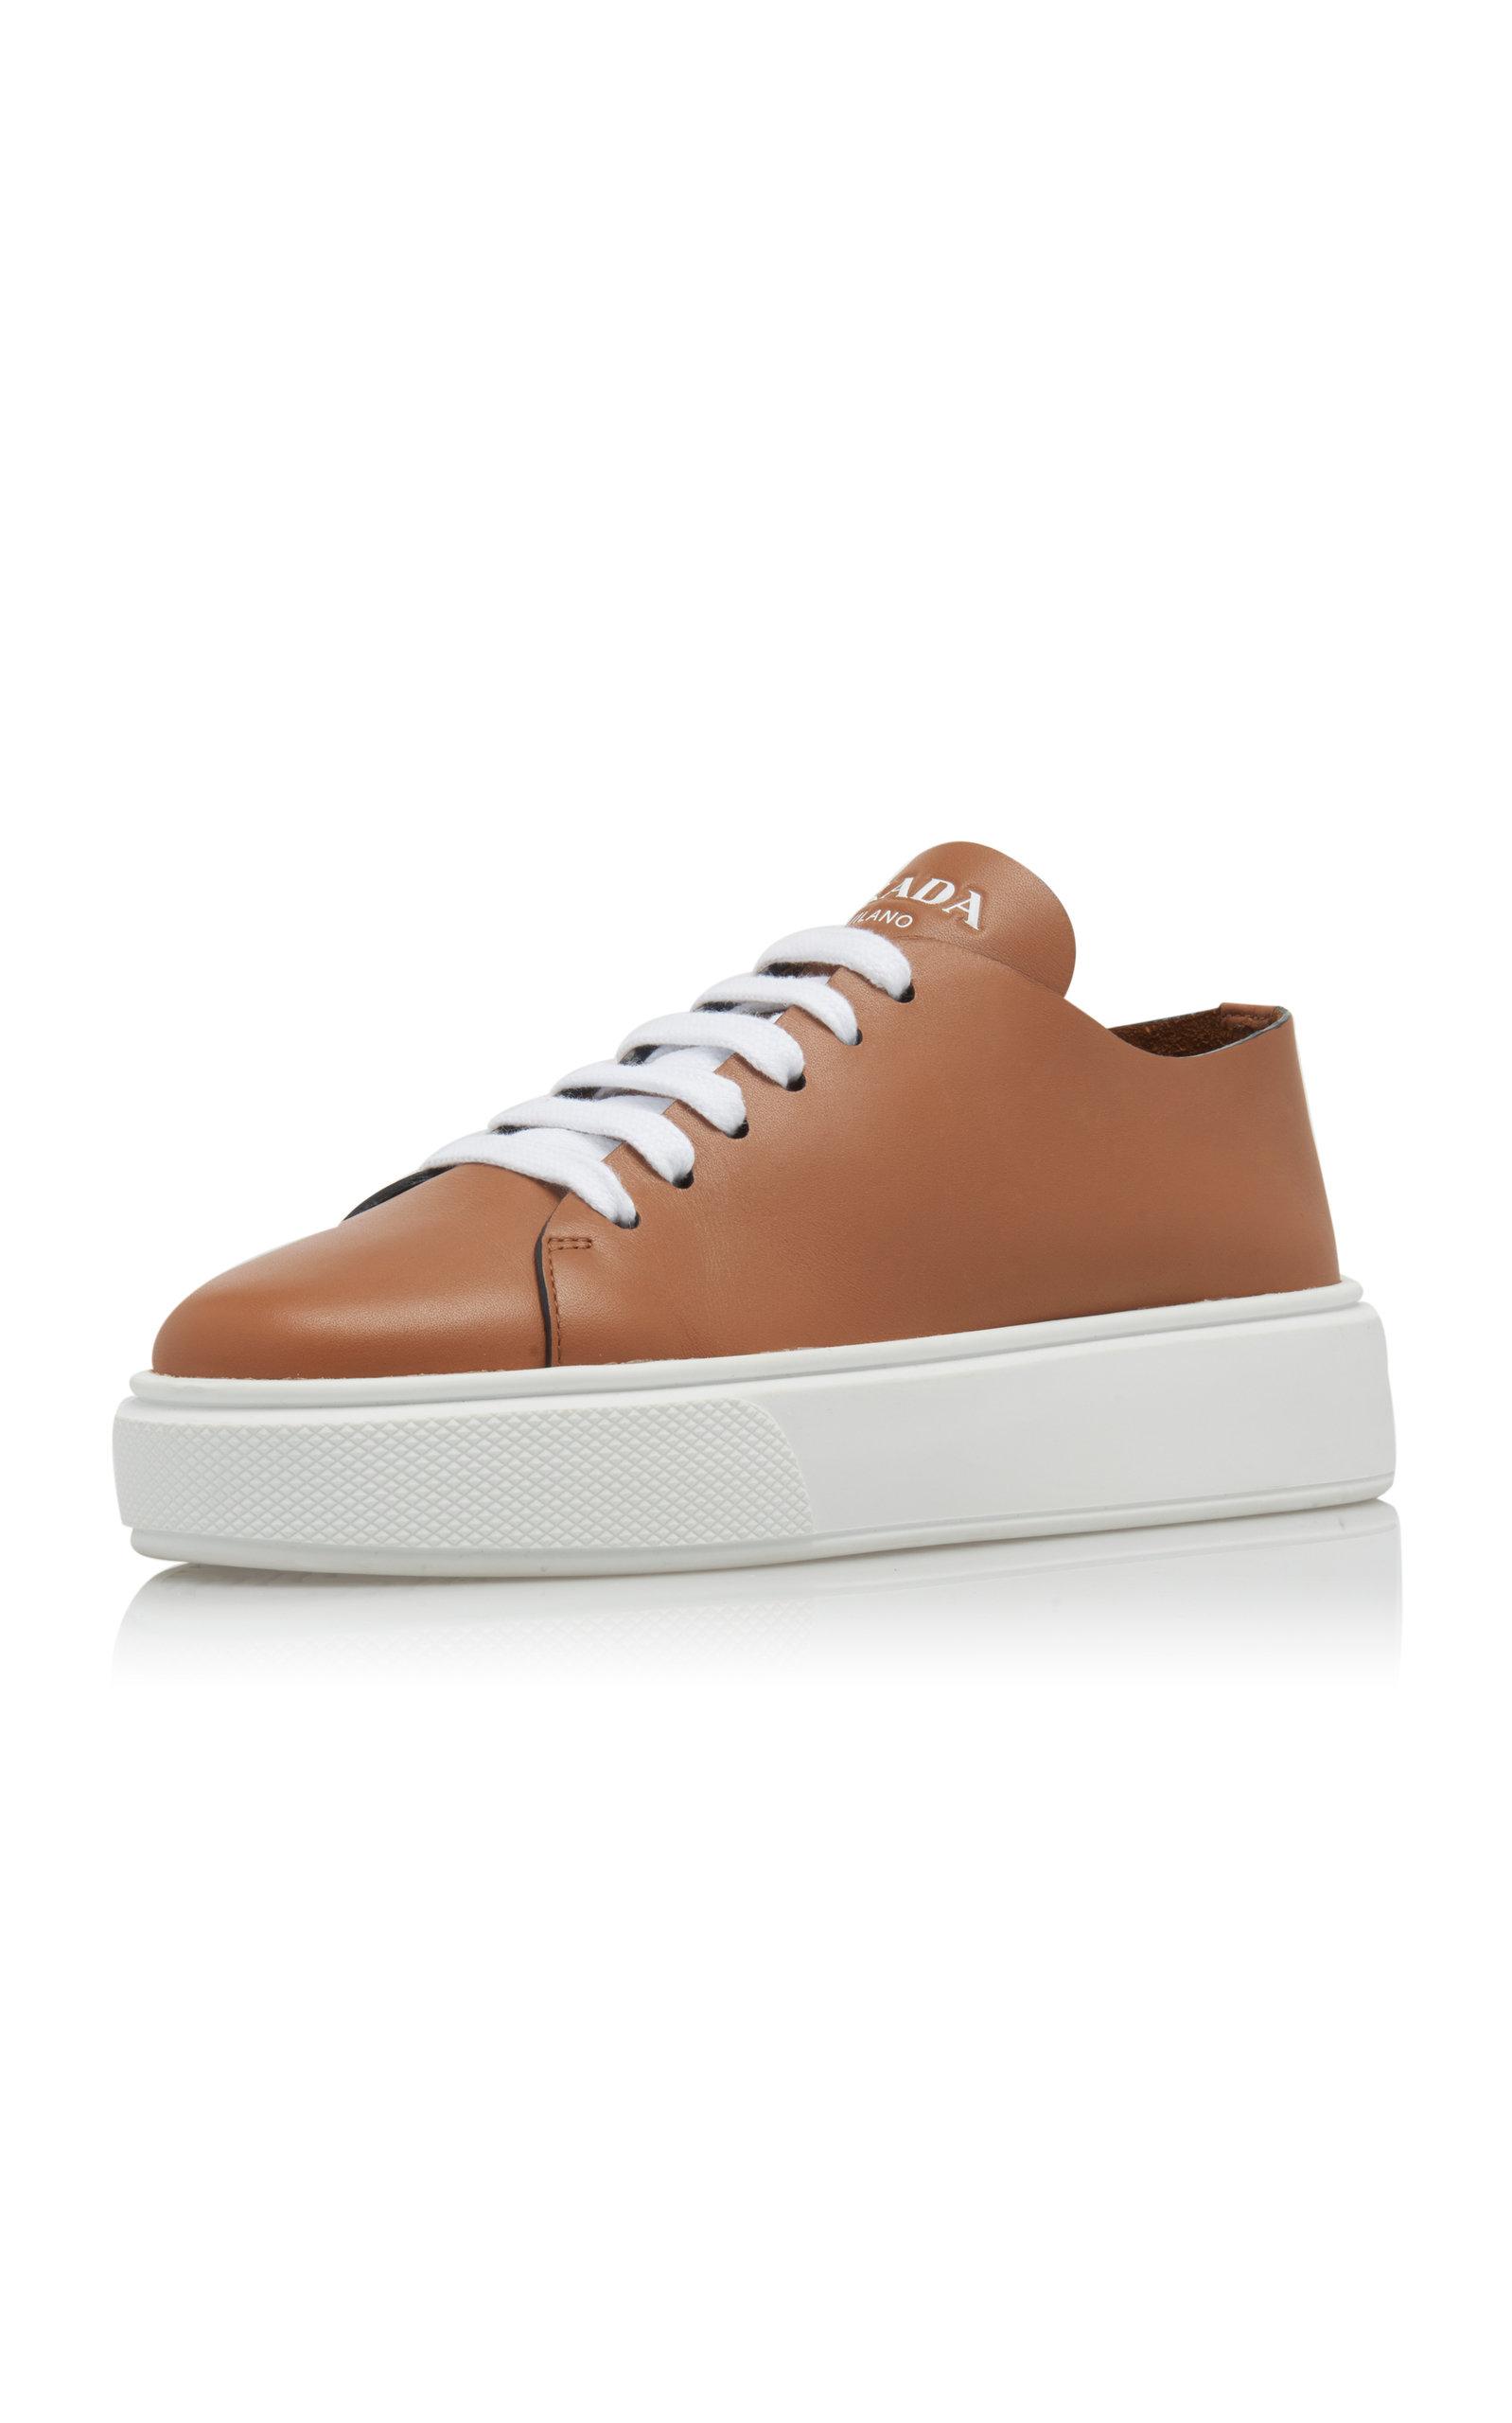 Prada Minimal Leather Trainers in Brown | Lyst